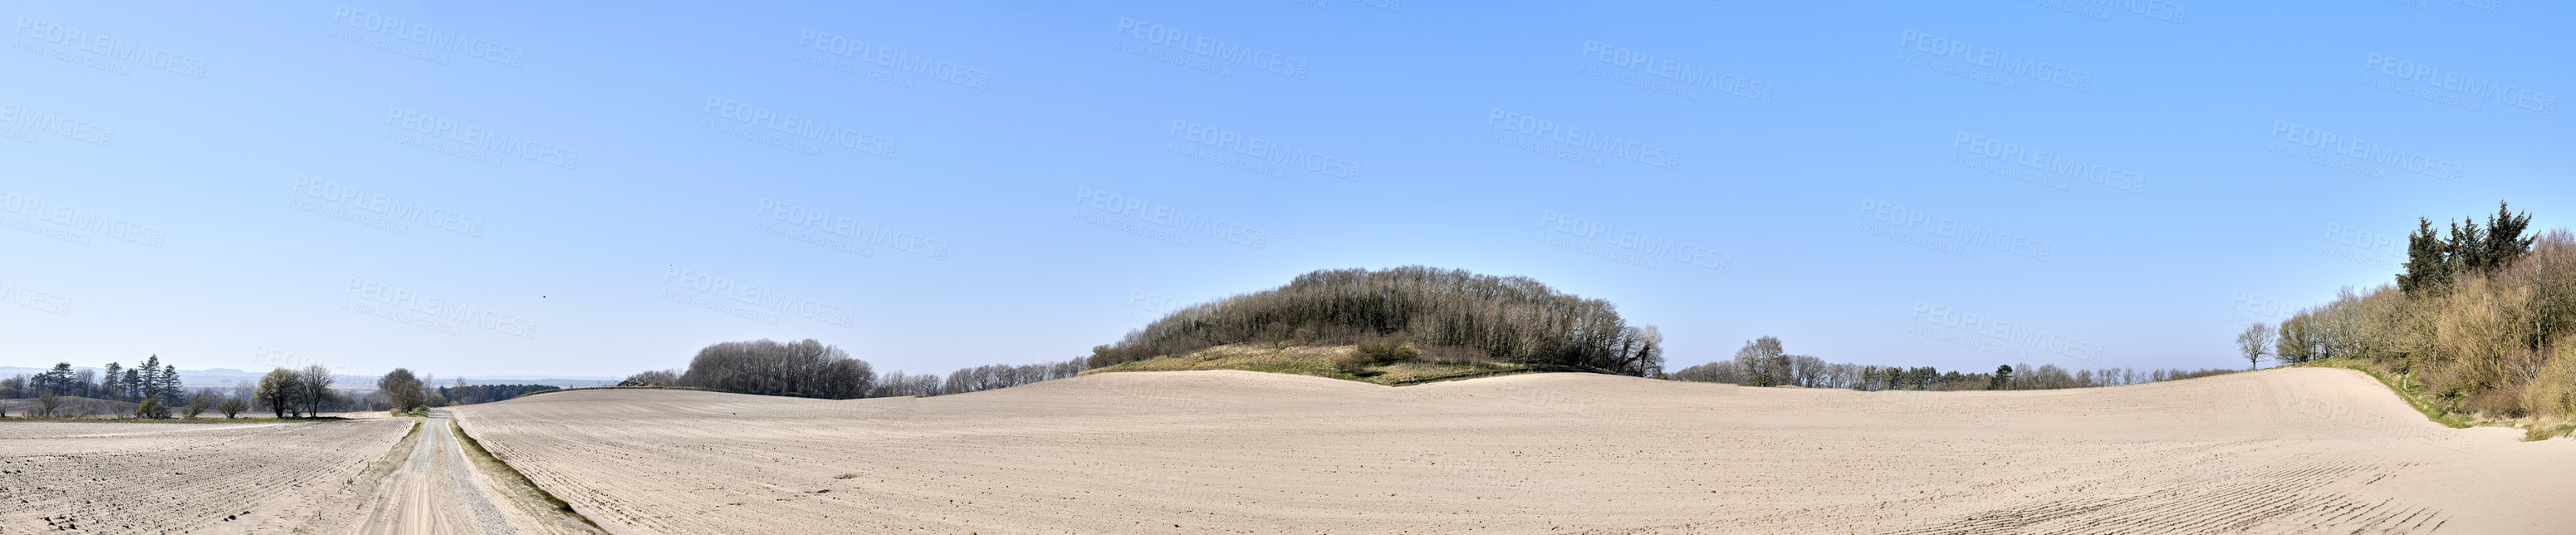 Buy stock photo Copy space with view of trees on a sandy and barren farm with clear blue sky background on a sunny day. Panoramic landscape of a dry, arid and uncultivated land on the East Coast of Jutland, Denmark